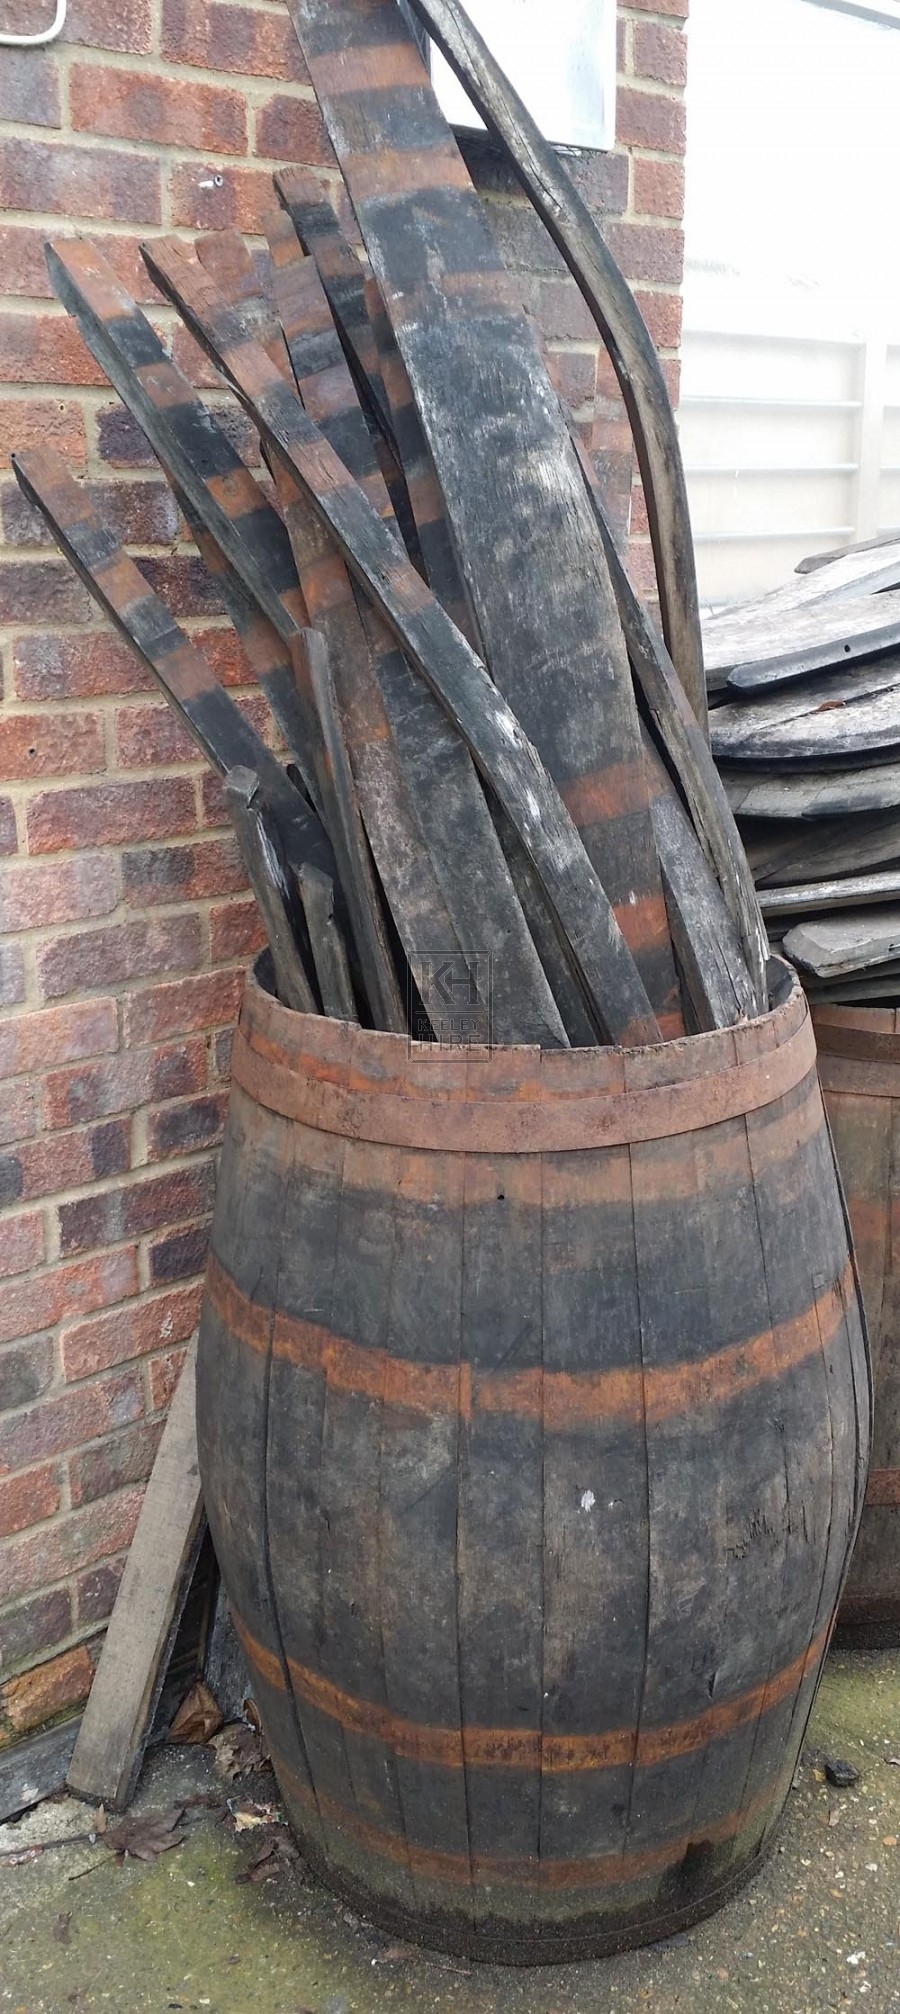 Open barrel with wood staves